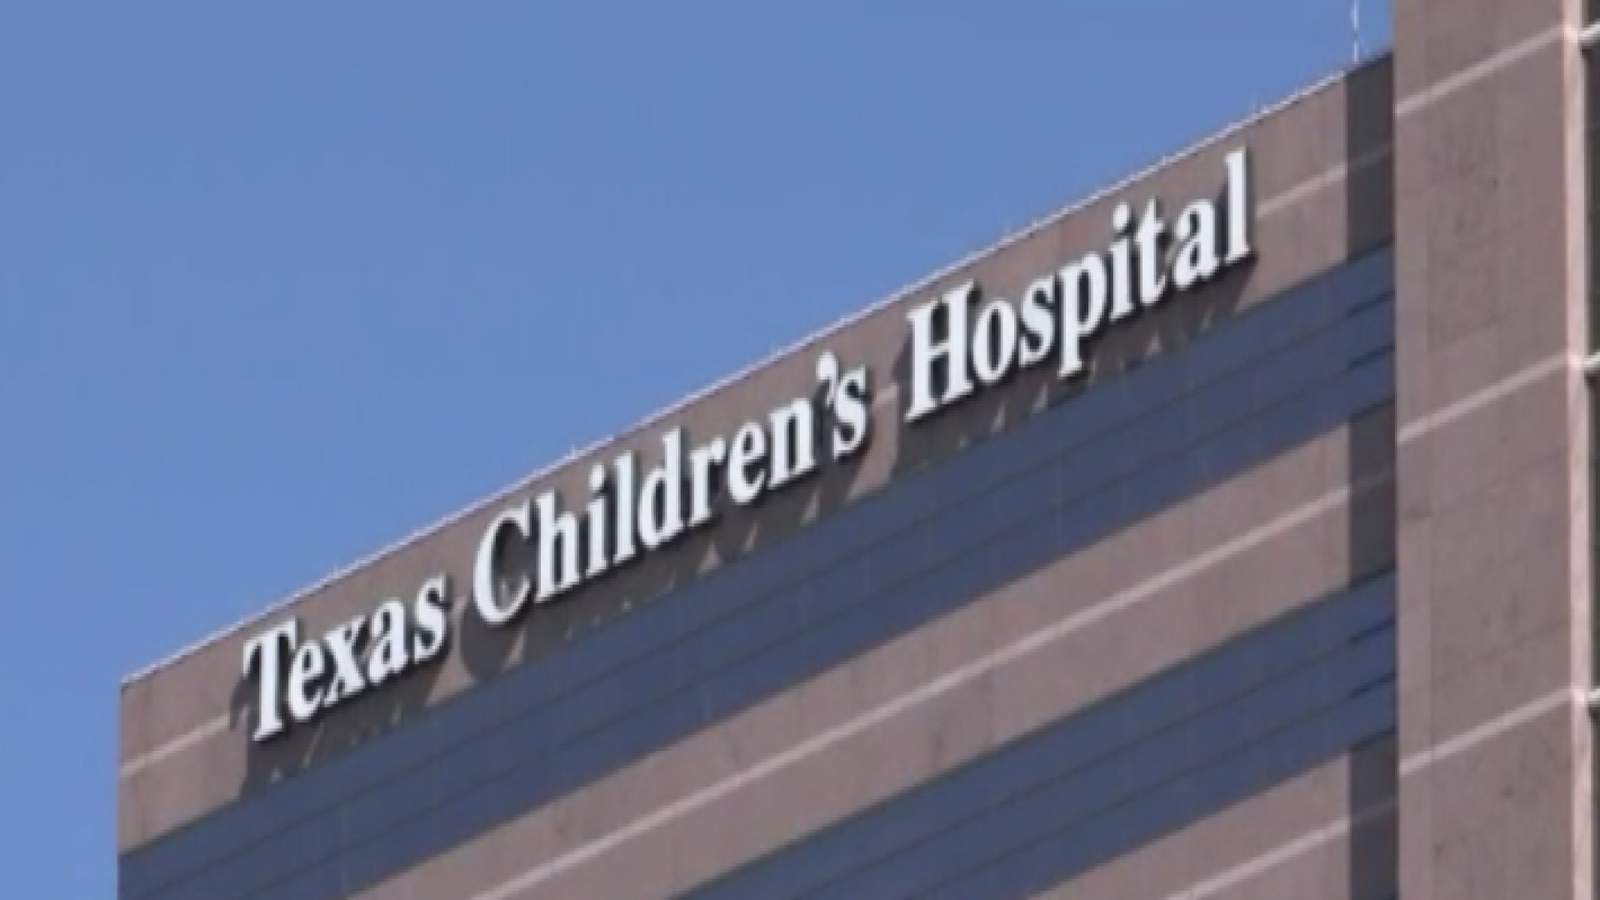 Texas Children’s Hospital begins vaccinating teens with chronic, underlying health conditions